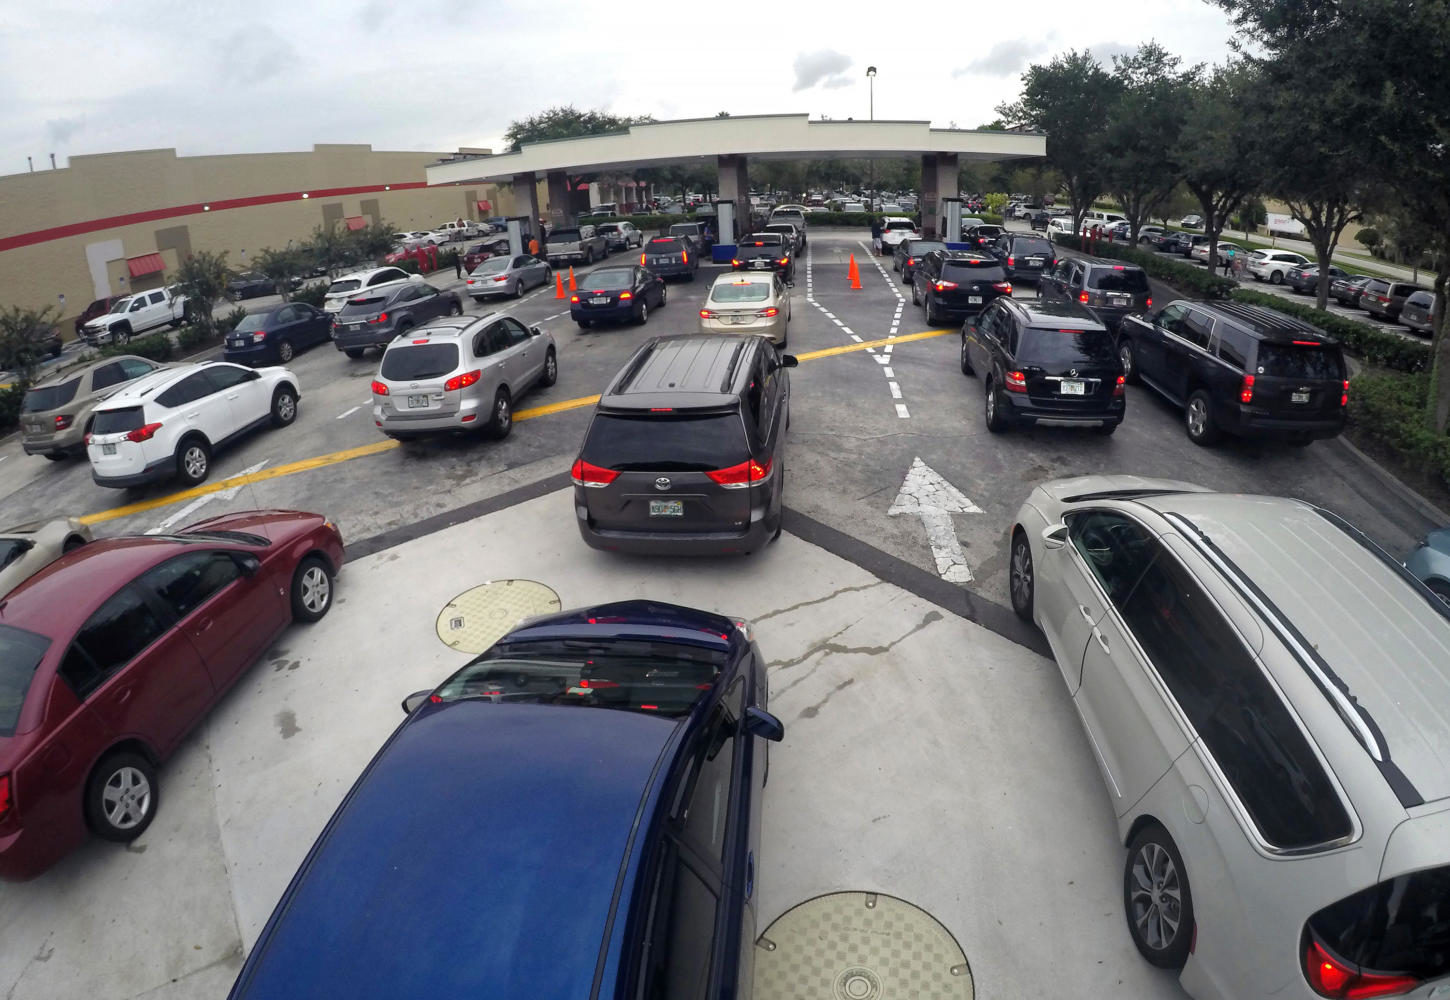 Drivers+wait+in+line+for+gasoline+at+the+Costco+in+Altamonte+Springs%2C+Fla.%2C+ahead+of+the+anticipated+arrival+of+Hurricane+Irma+on+Wednesday%2C+Sept.+6%2C+2017.+%28Joe+Burbank%2FOrlando+Sentinel%2FTNS%29